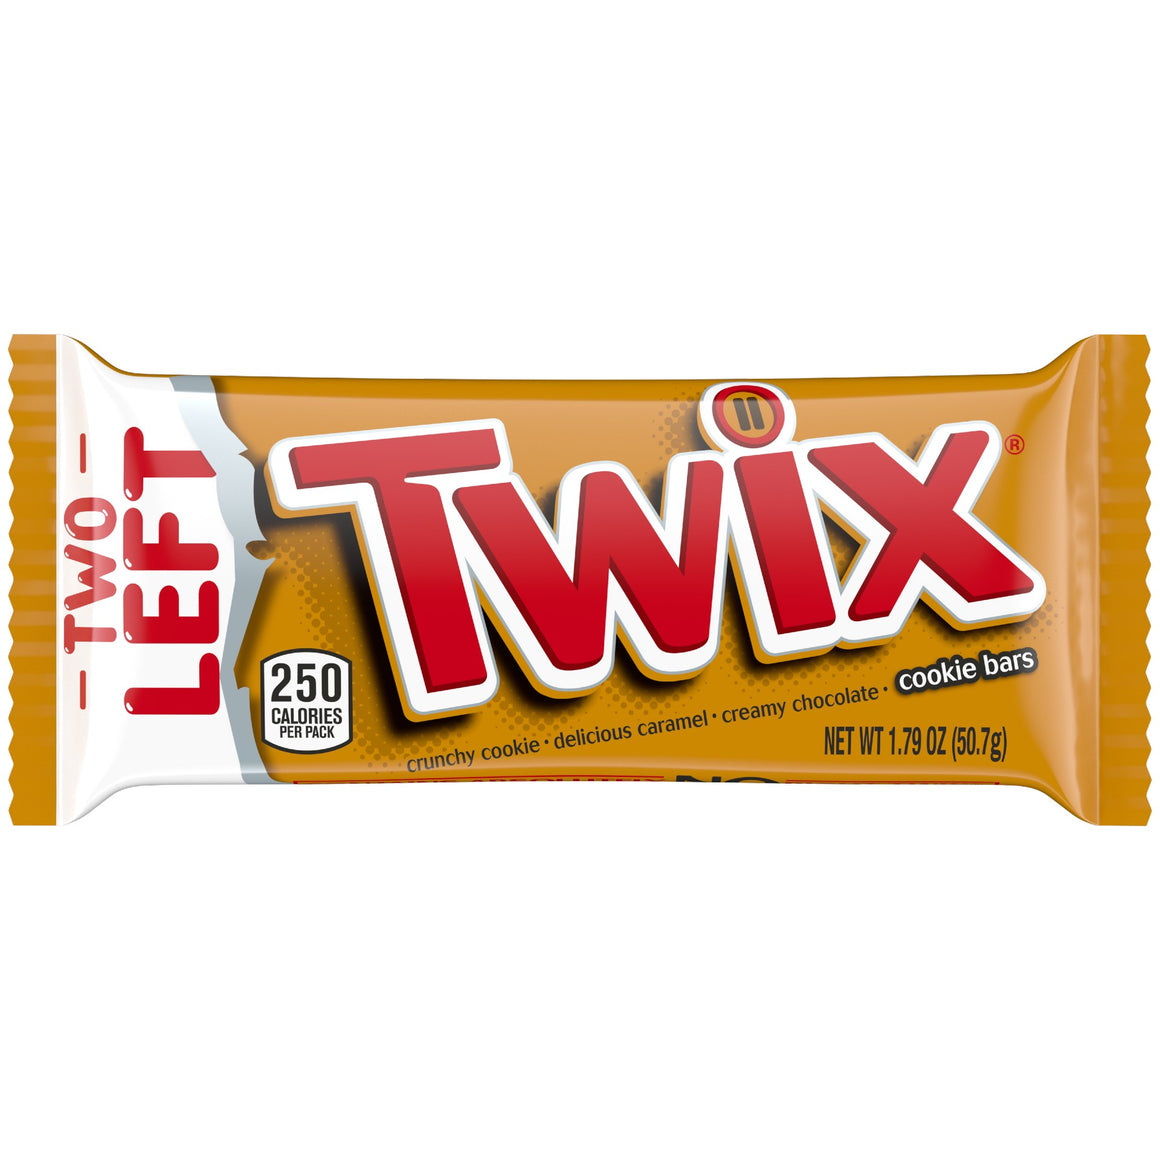 All City Candy Twix Cookie Bar 1.79-oz. 1 Bar Candy Bars Mars Chocolate For fresh candy and great service, visit www.allcitycandy.com